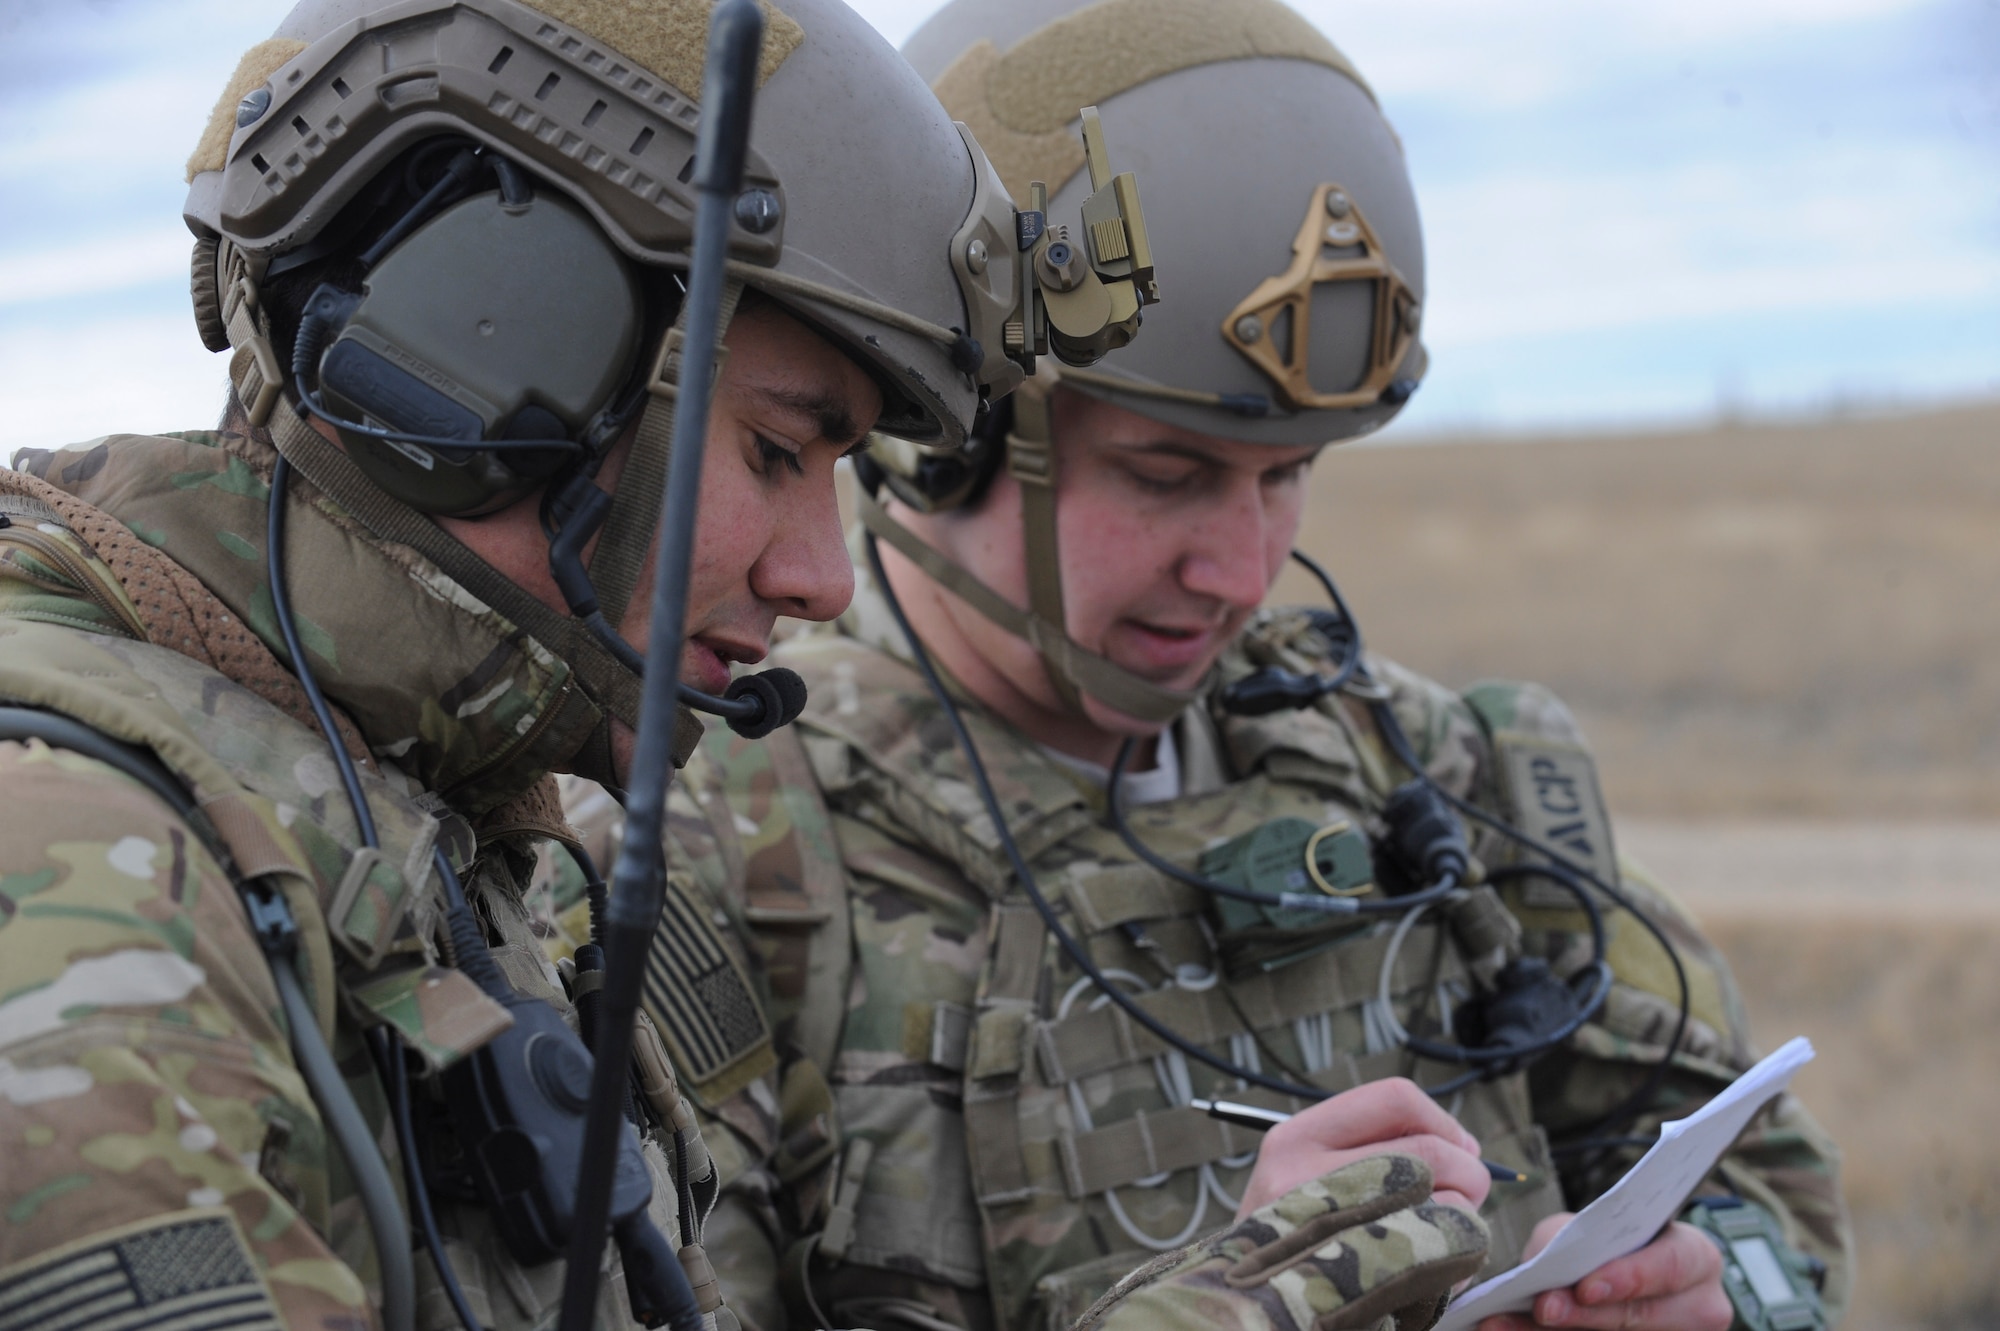 Staff Sgts. Edward Breen and Michael Pincher, joint terminal attack controllers assigned to the 5th Air Support Operations Squadron, Joint Base Lewis-McChord, Wash., write down location coordinates during a joint training exercise at the Powder River Training Complex, Belle Fourche, S.D., Nov. 16, 2016. The training exercise was designed to train both JTACs and aircrew under realistic scenarios that support full spectrum operations against modern threats. (U.S. Air Force photo by Senior Airman Anania Tekurio/Released)